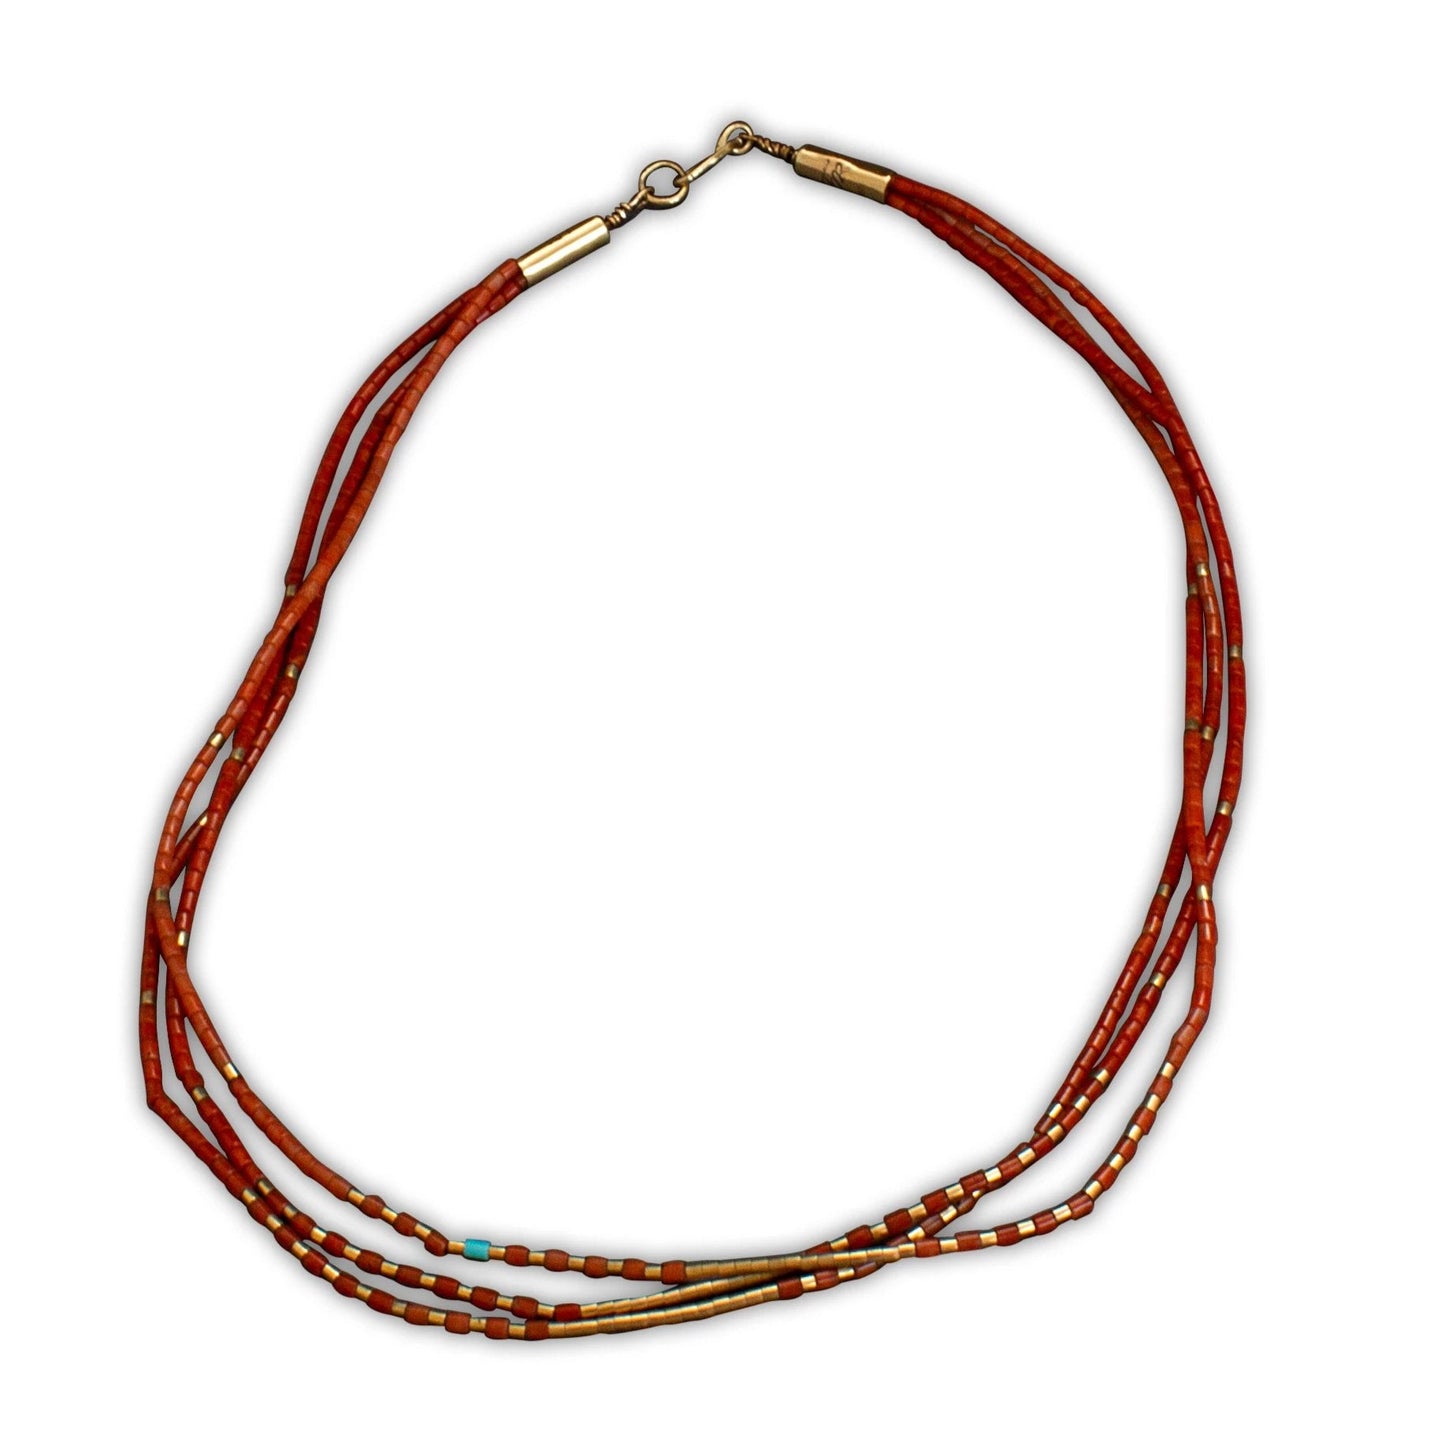 Johnny and Marlene Rosetta Necklace 3 Strands of Natural Coral and Gold - Turquoise & Tufa